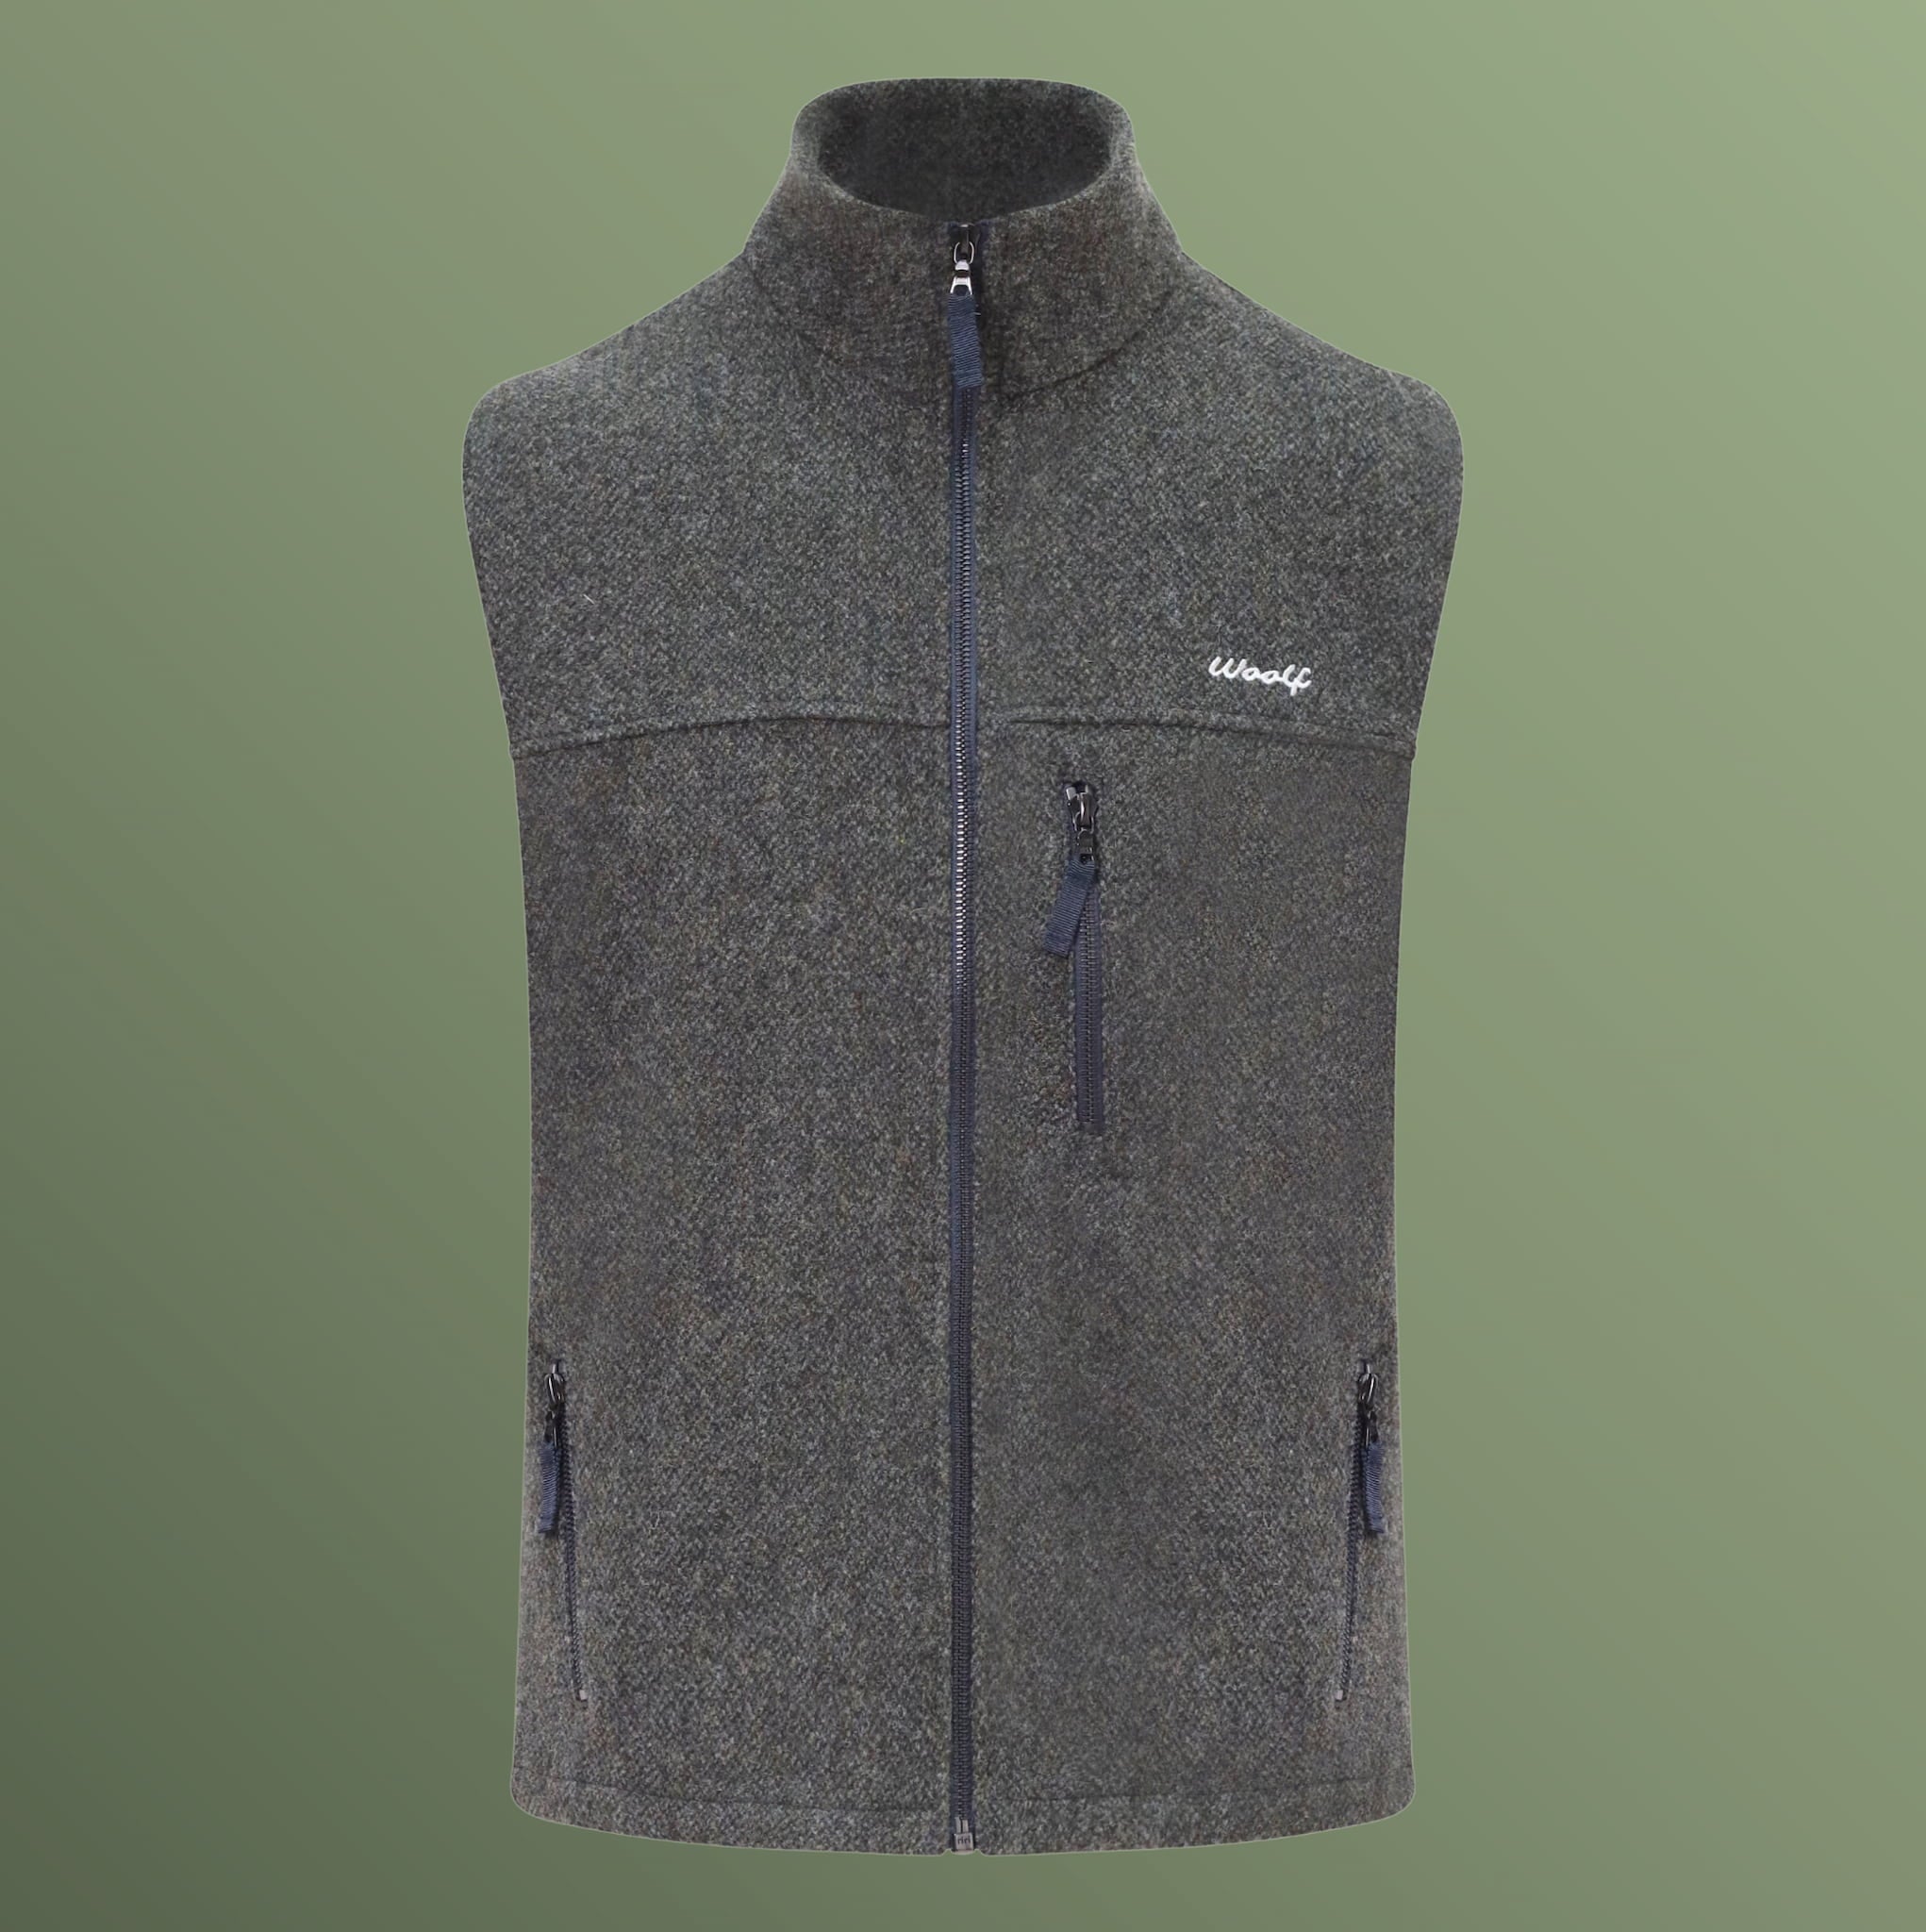 Men's PureFleece 100% Merino Wool mid layer Gilet. Created with our unique weave for superior performance over knitted merino fleece tops.